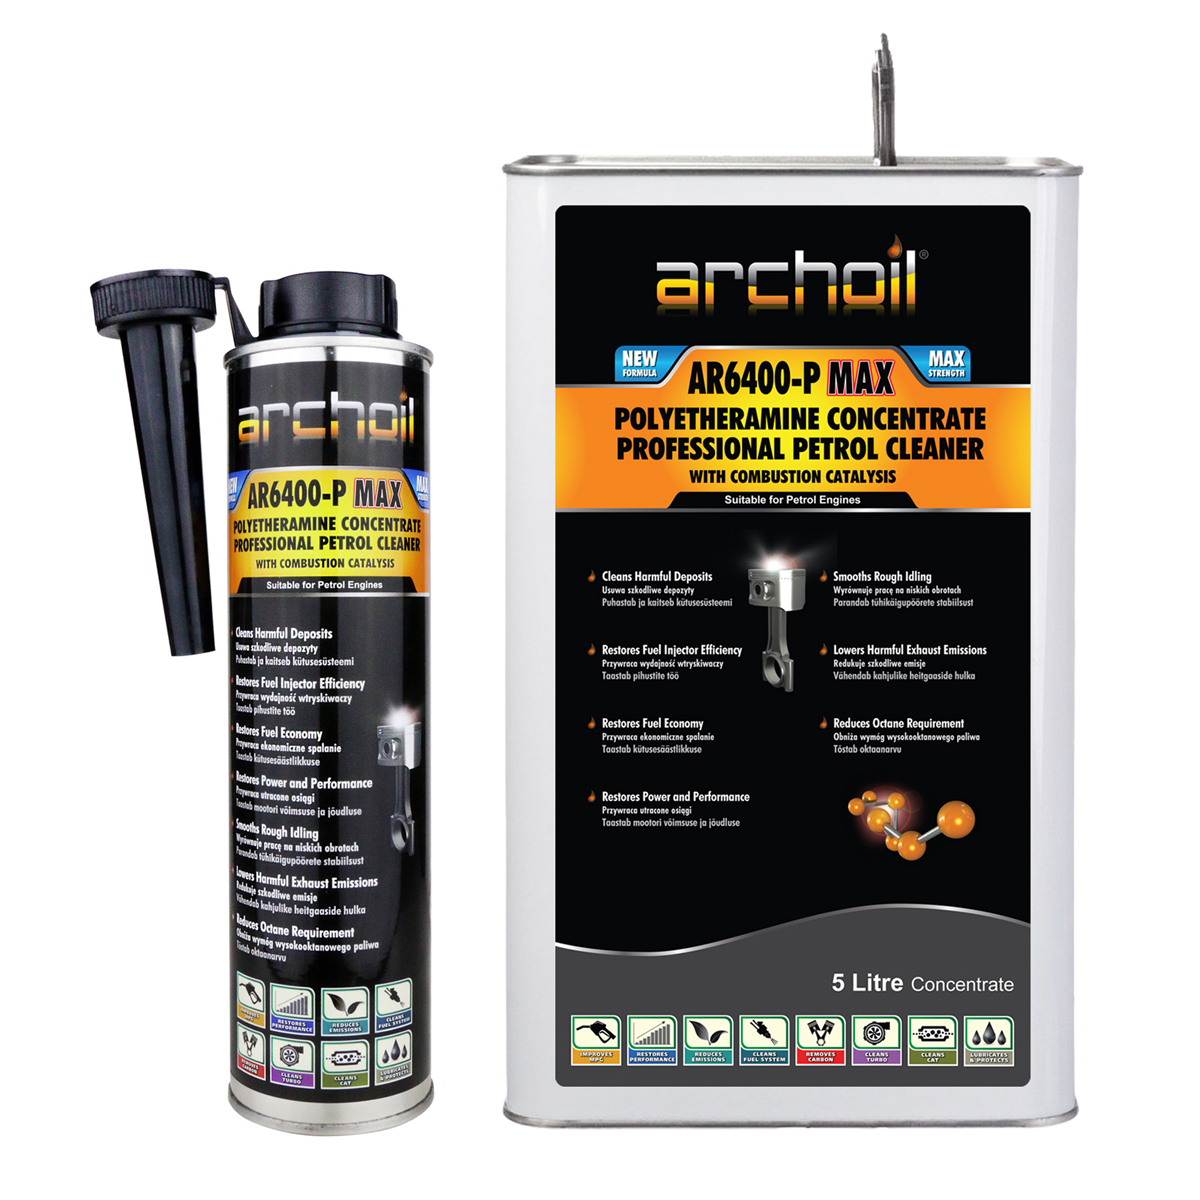 Archoil AR6400-P Max Polyetheramine Concentrate Professional Petrol Cleaner